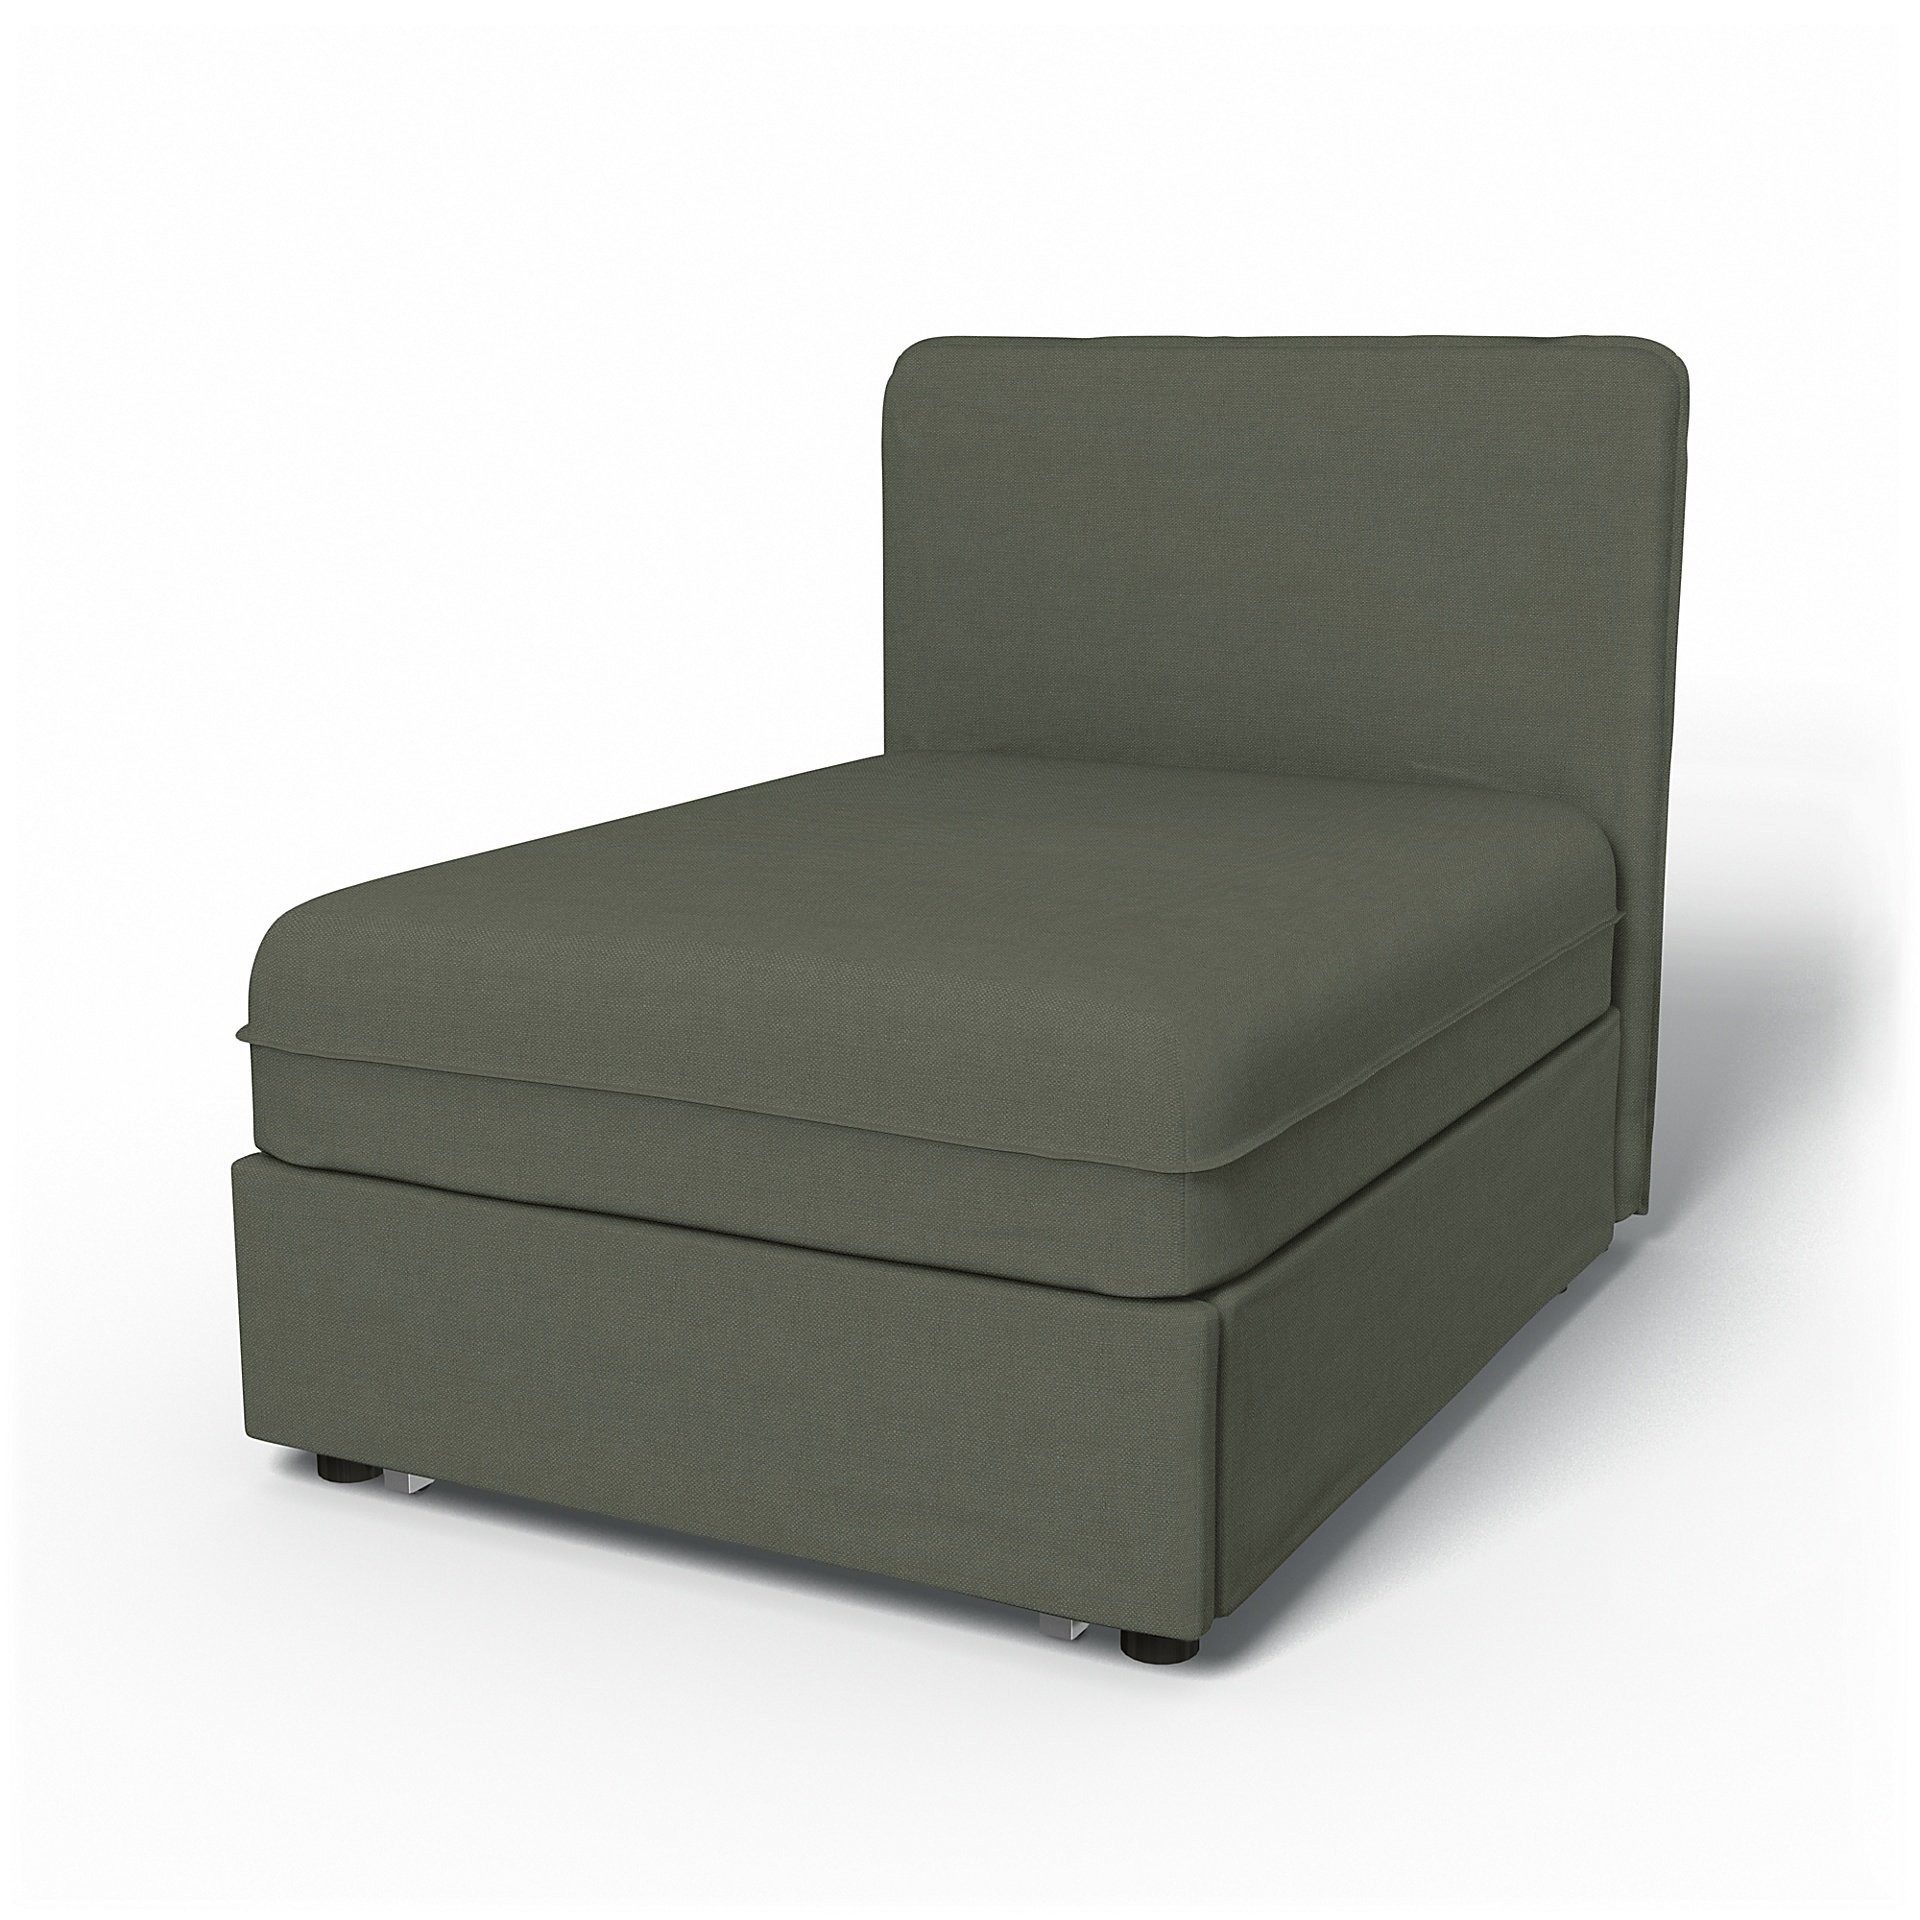 IKEA - Vallentuna Seat Module with Low Back Sofa Bed Cover 80x100 cm 32x39in, Rosemary, Linen - Bemz